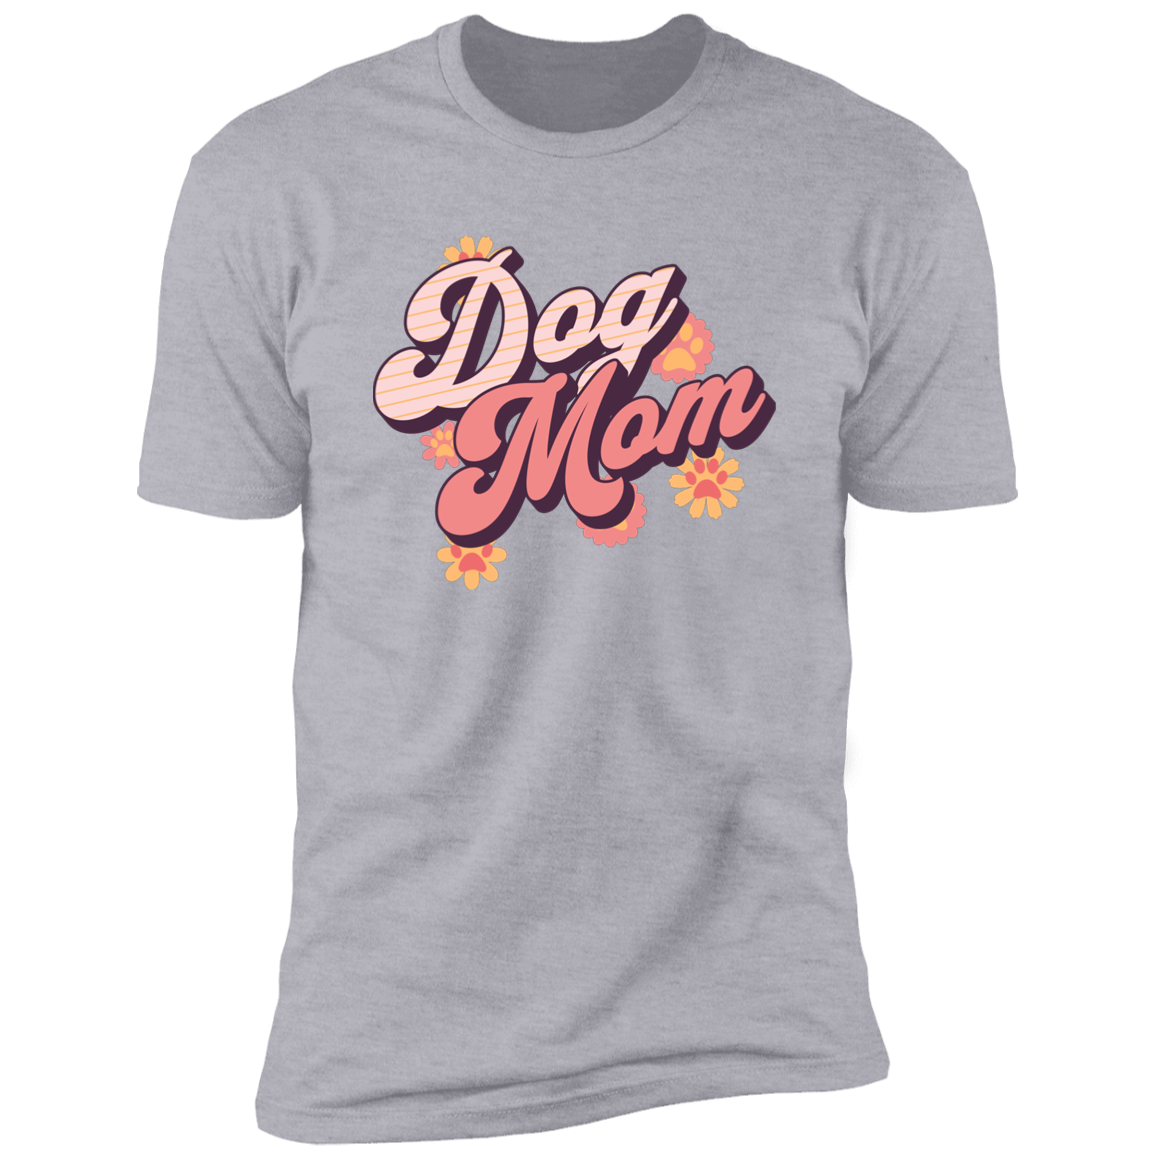 Retro Dog Mom t-shirt, Dog Mom shirt, Dog T-shirt for humans, in light heather gray